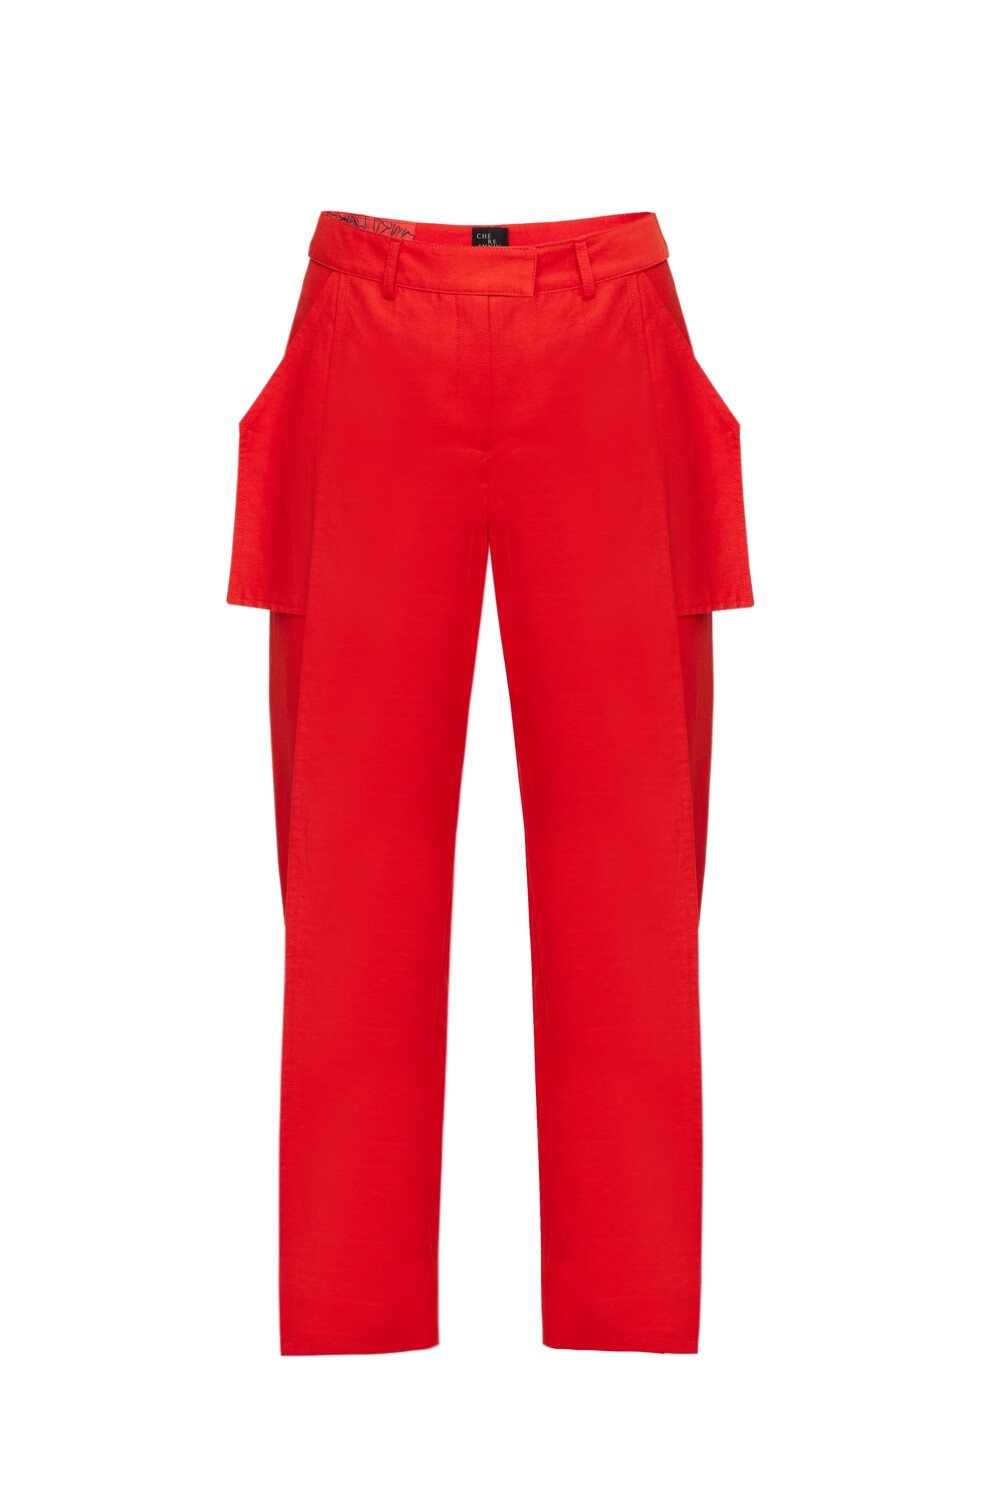 Red linen trousers